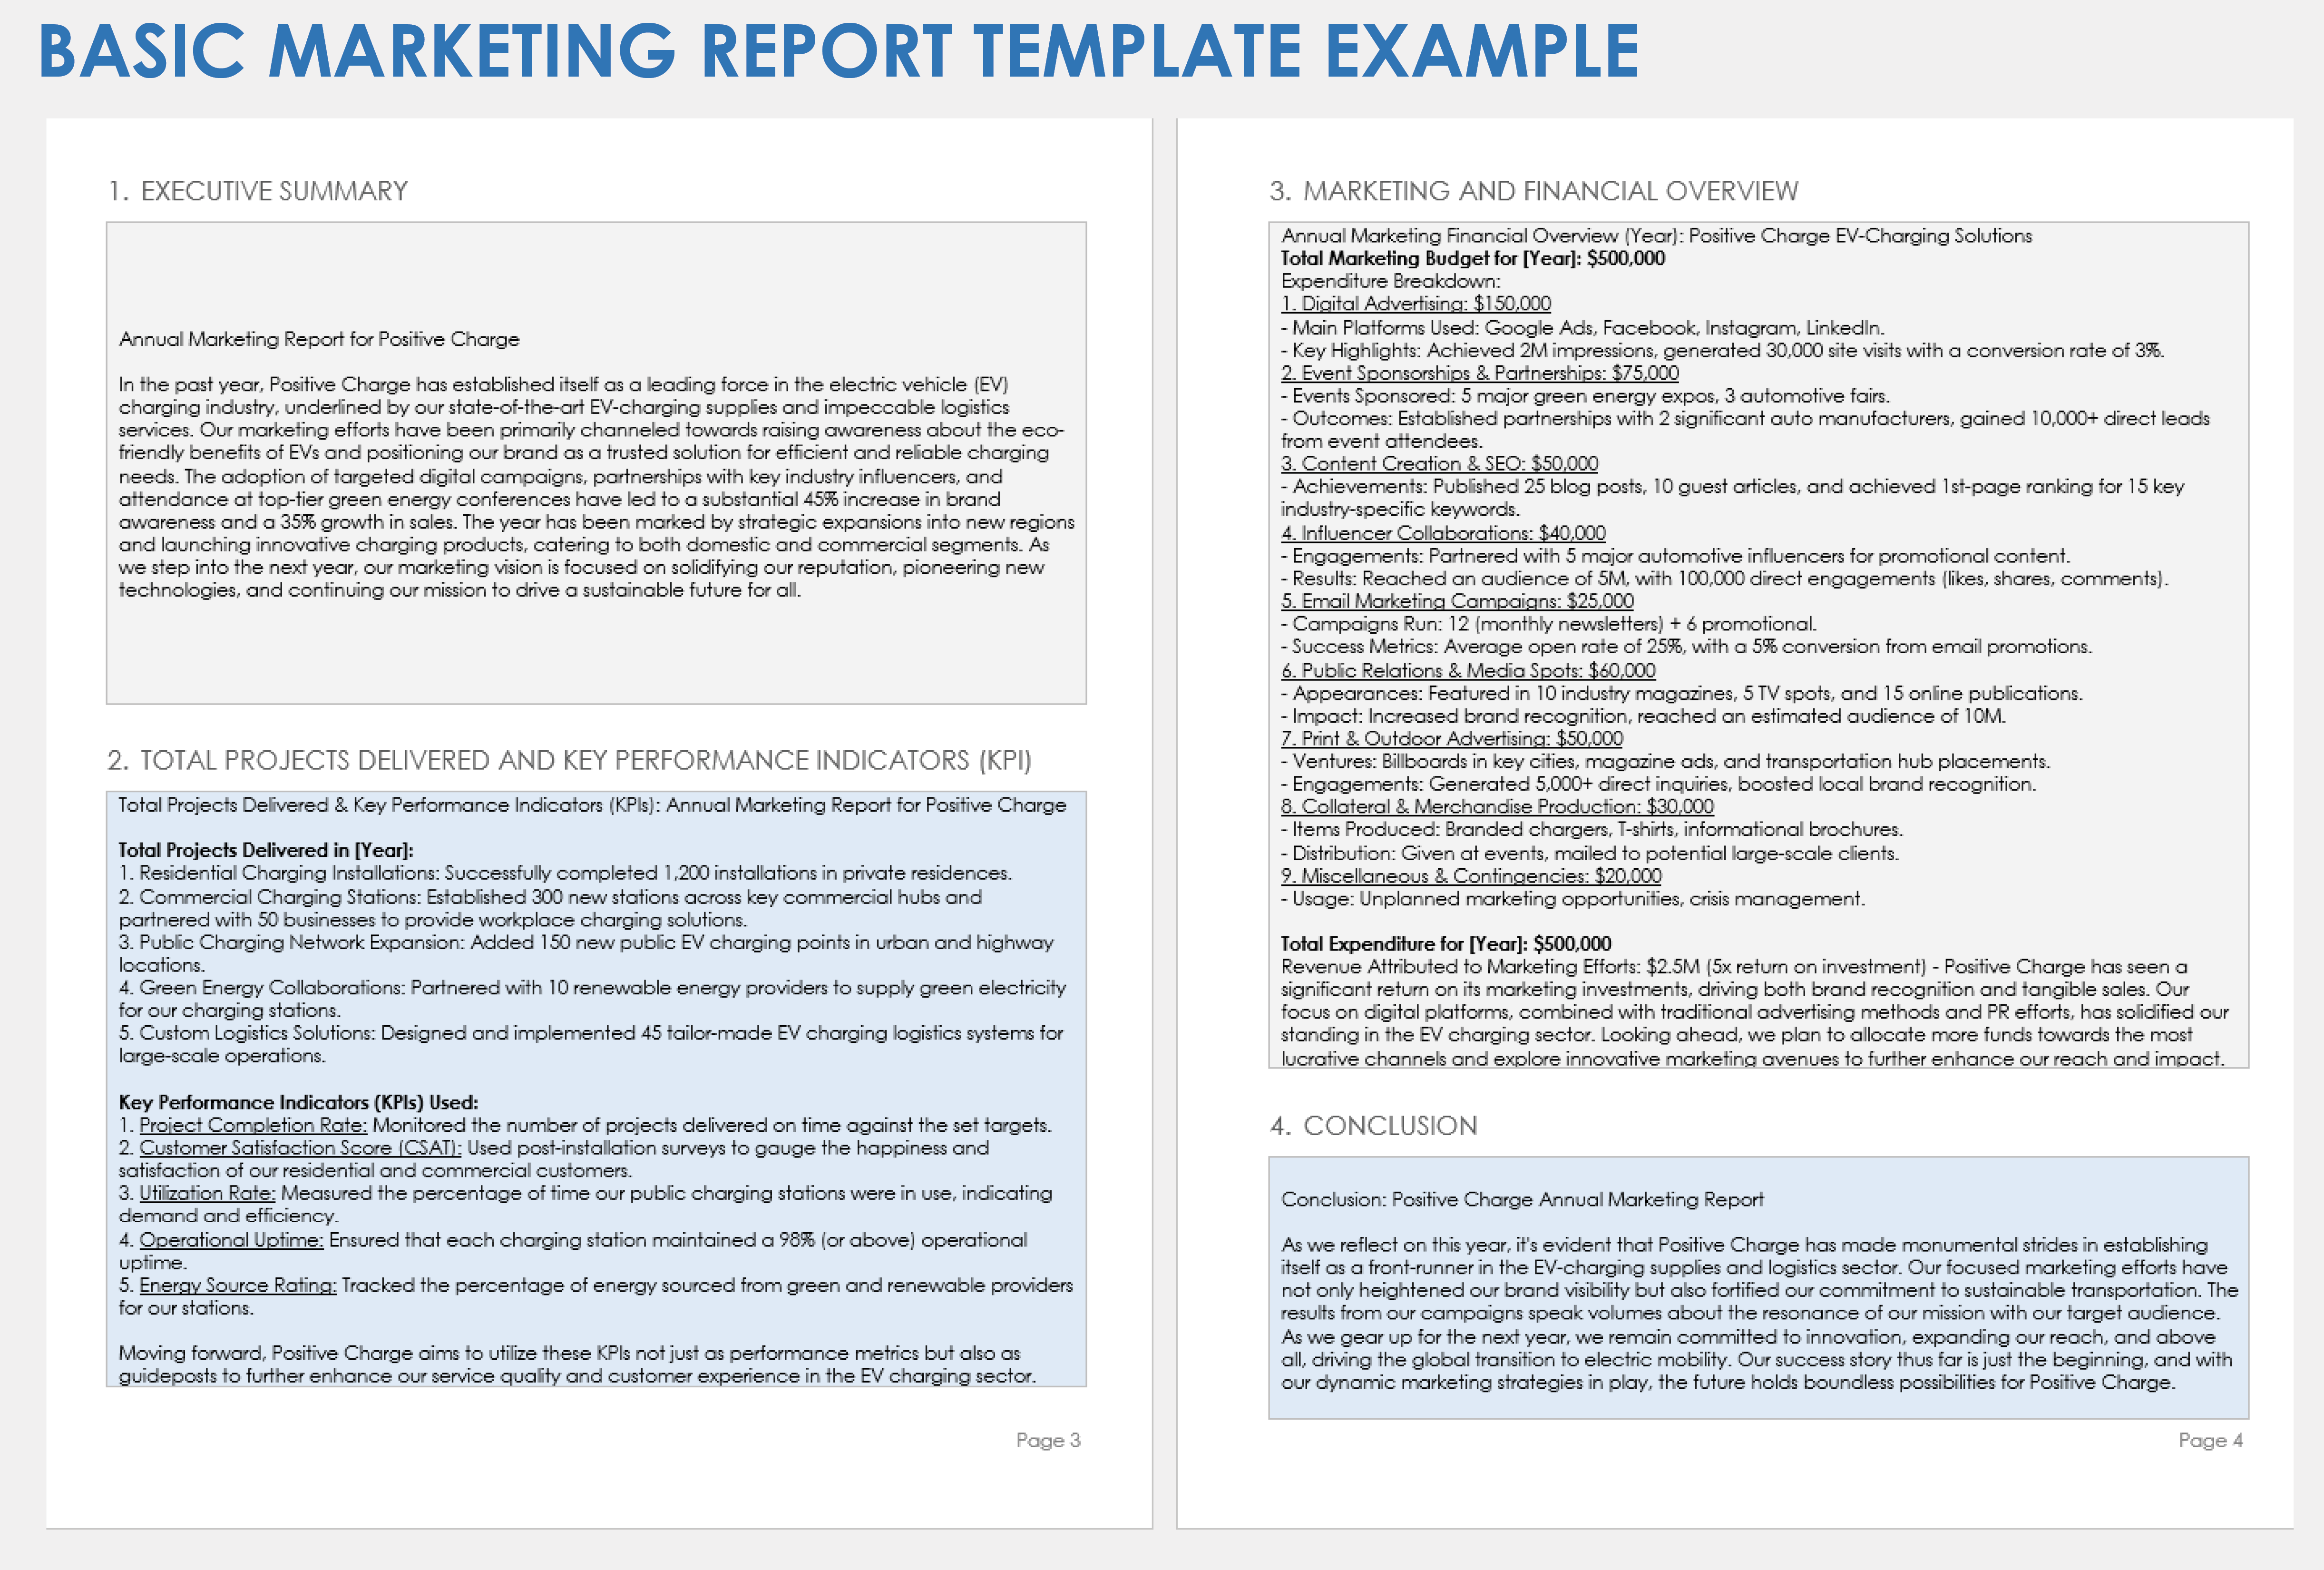 Basic Marketing Report Example Template